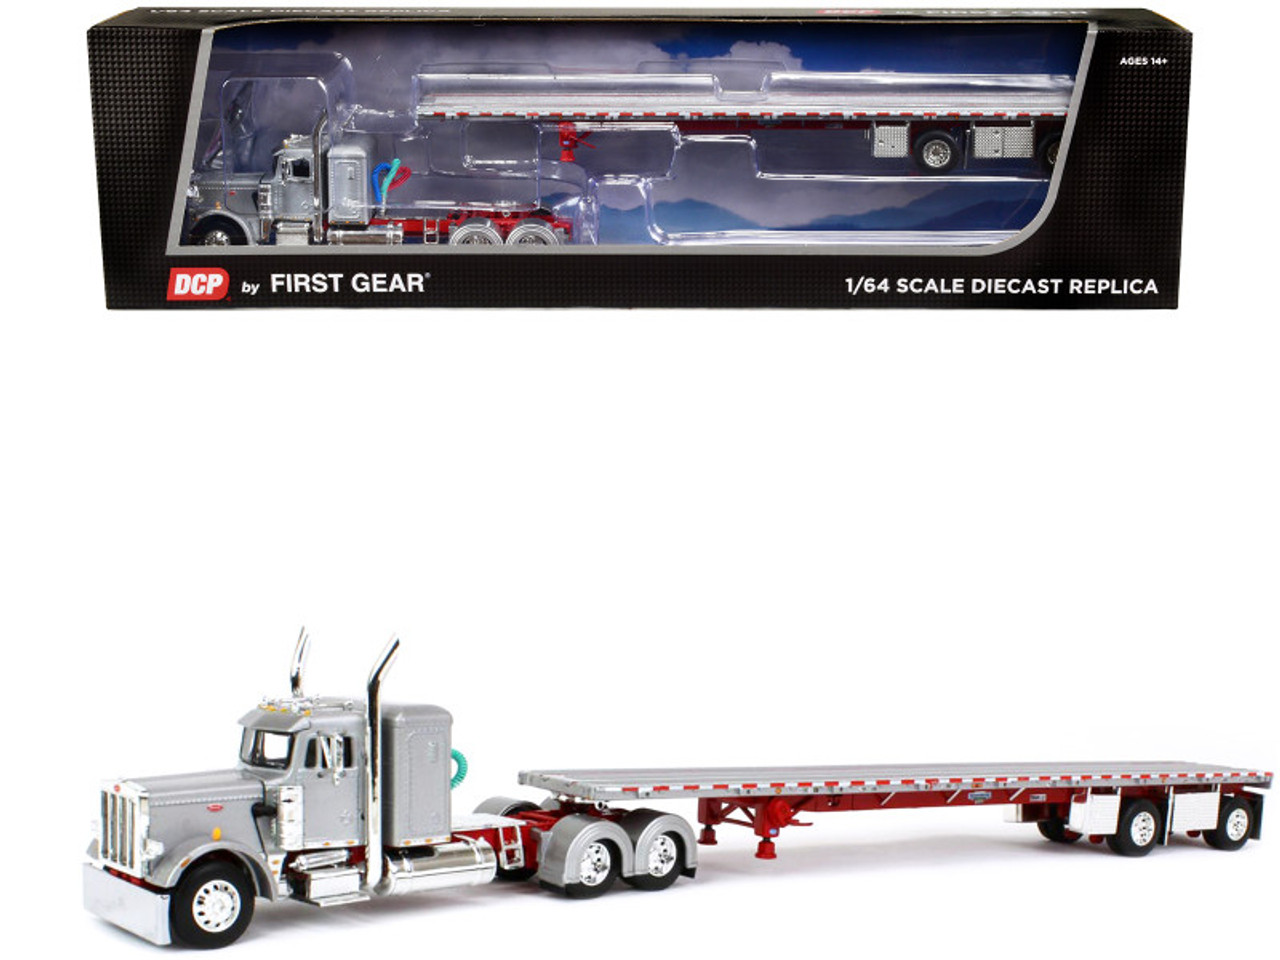 Peterbilt 359 with 36" Flat Top Sleeper and Wilson Roadbrute Spread-Axle Flatbed Trailer Silver and Red 1/64 Diecast Model by DCP/First Gear